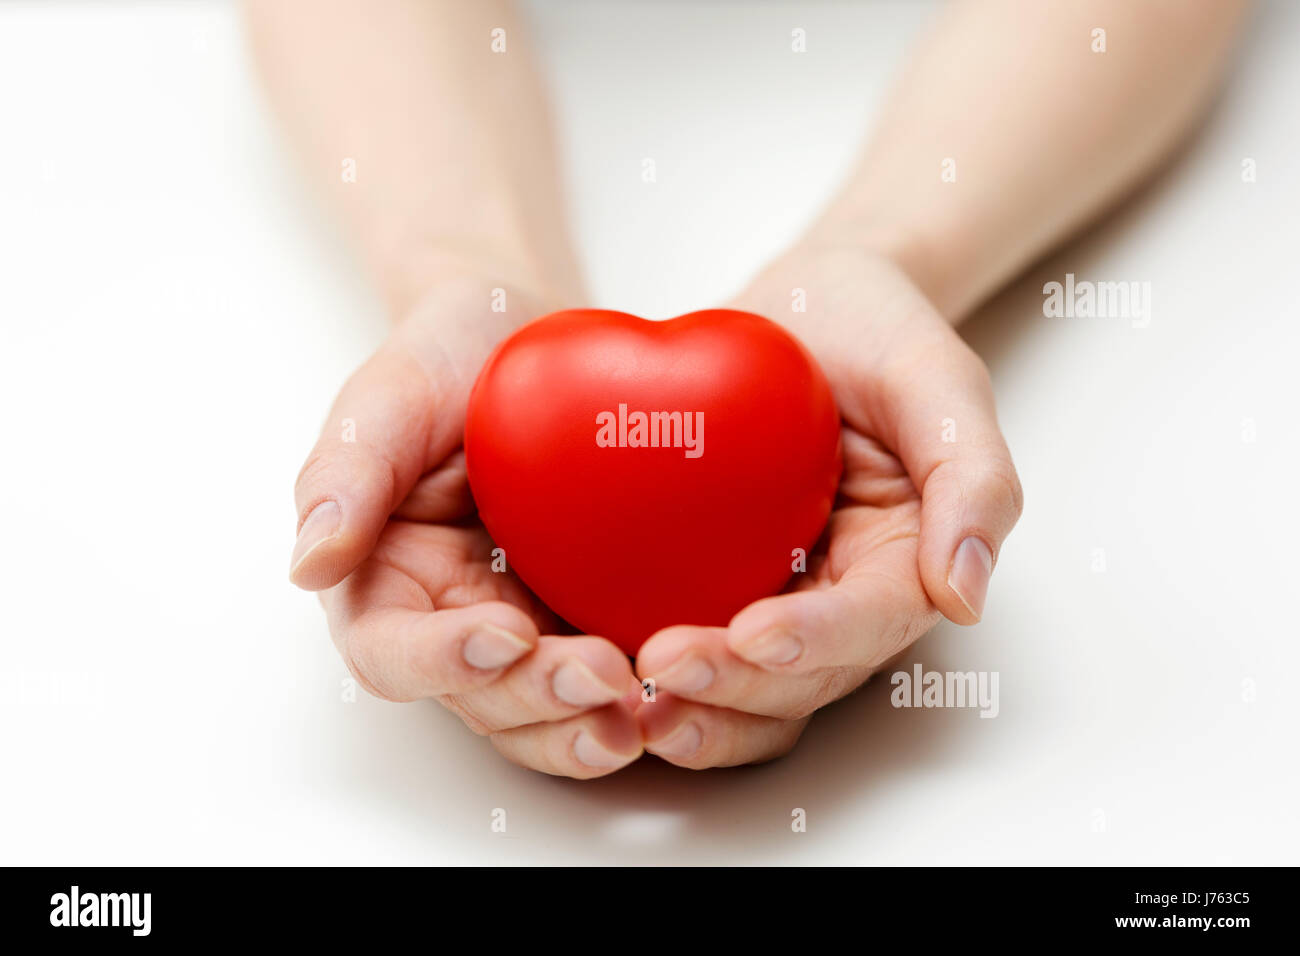 heart care, health insurance or giving love concept Stock Photo